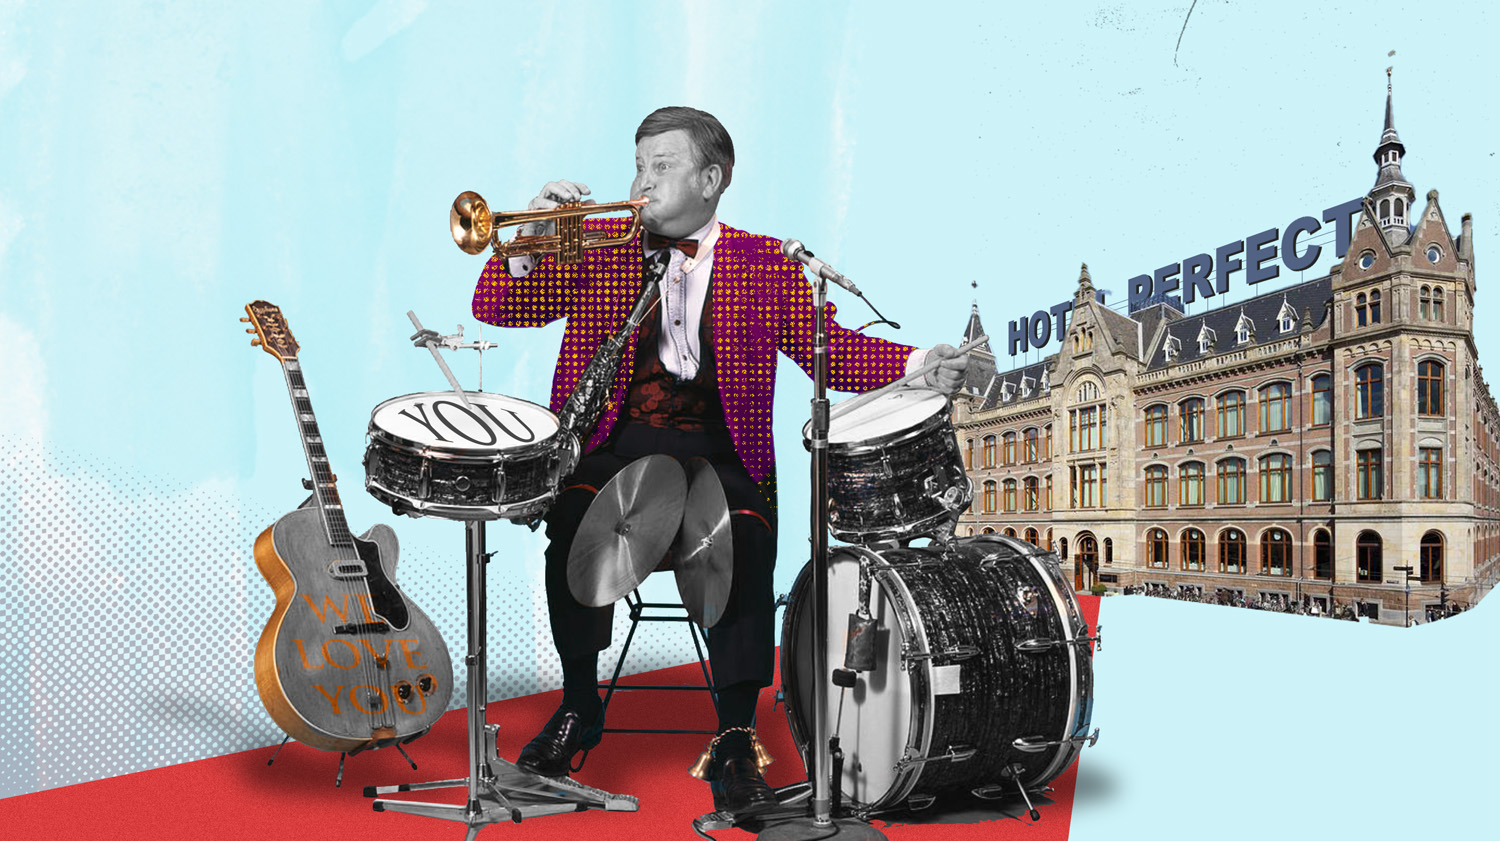 Guest Personalization cover image - featuring an animation of a man playing drums, trumpet, and guitar in front of a hotel.